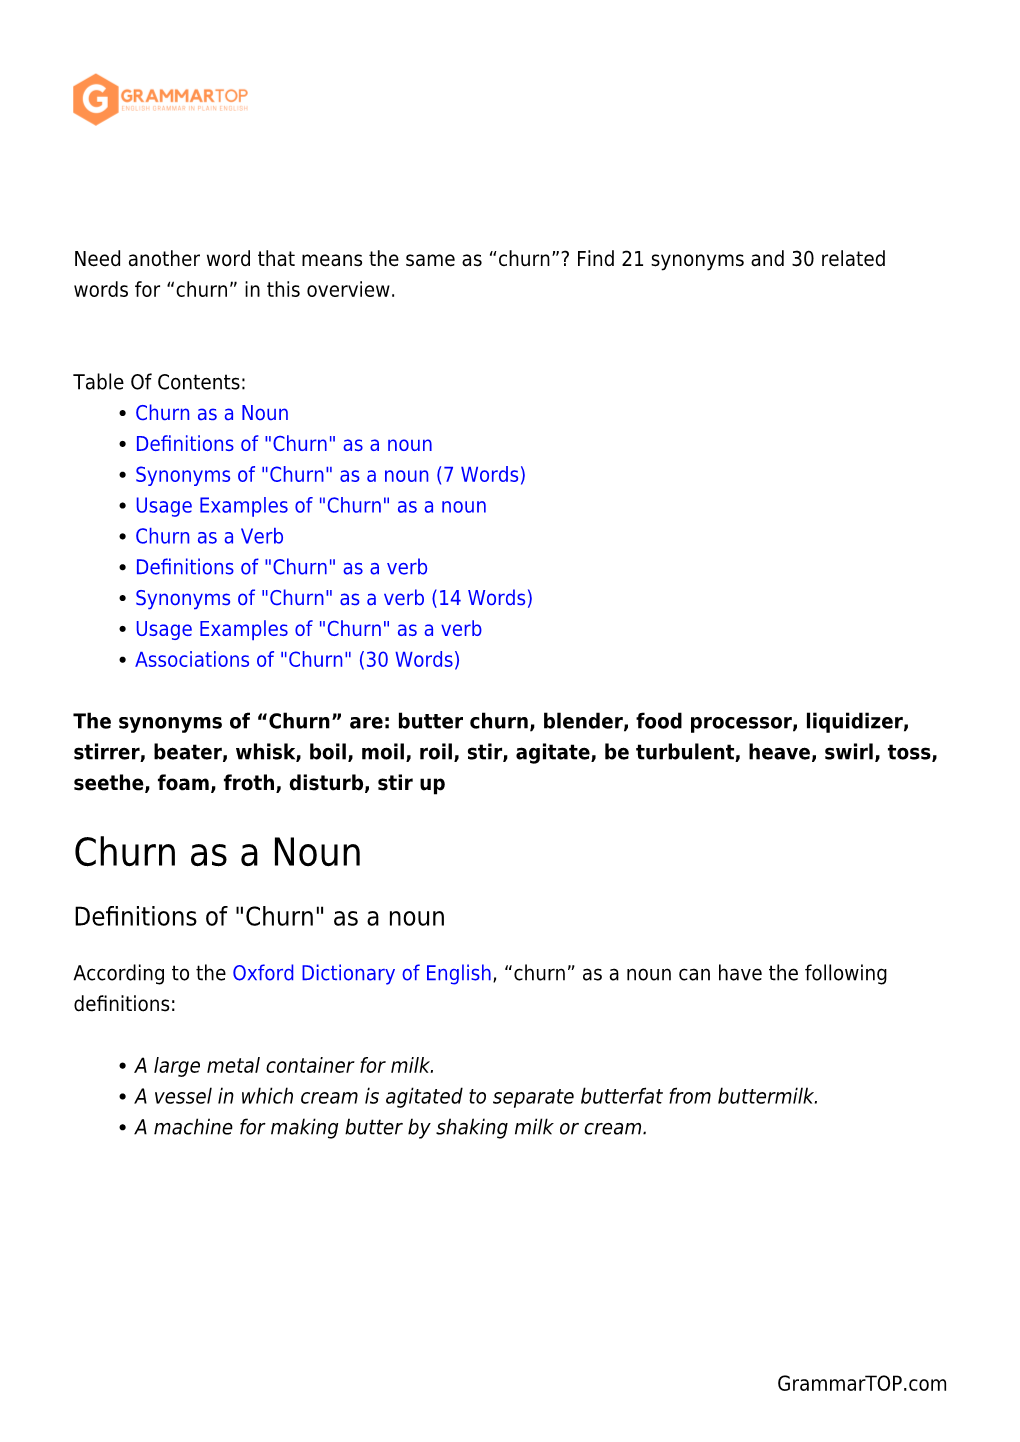 Churn”? Find 21 Synonyms and 30 Related Words for “Churn” in This Overview